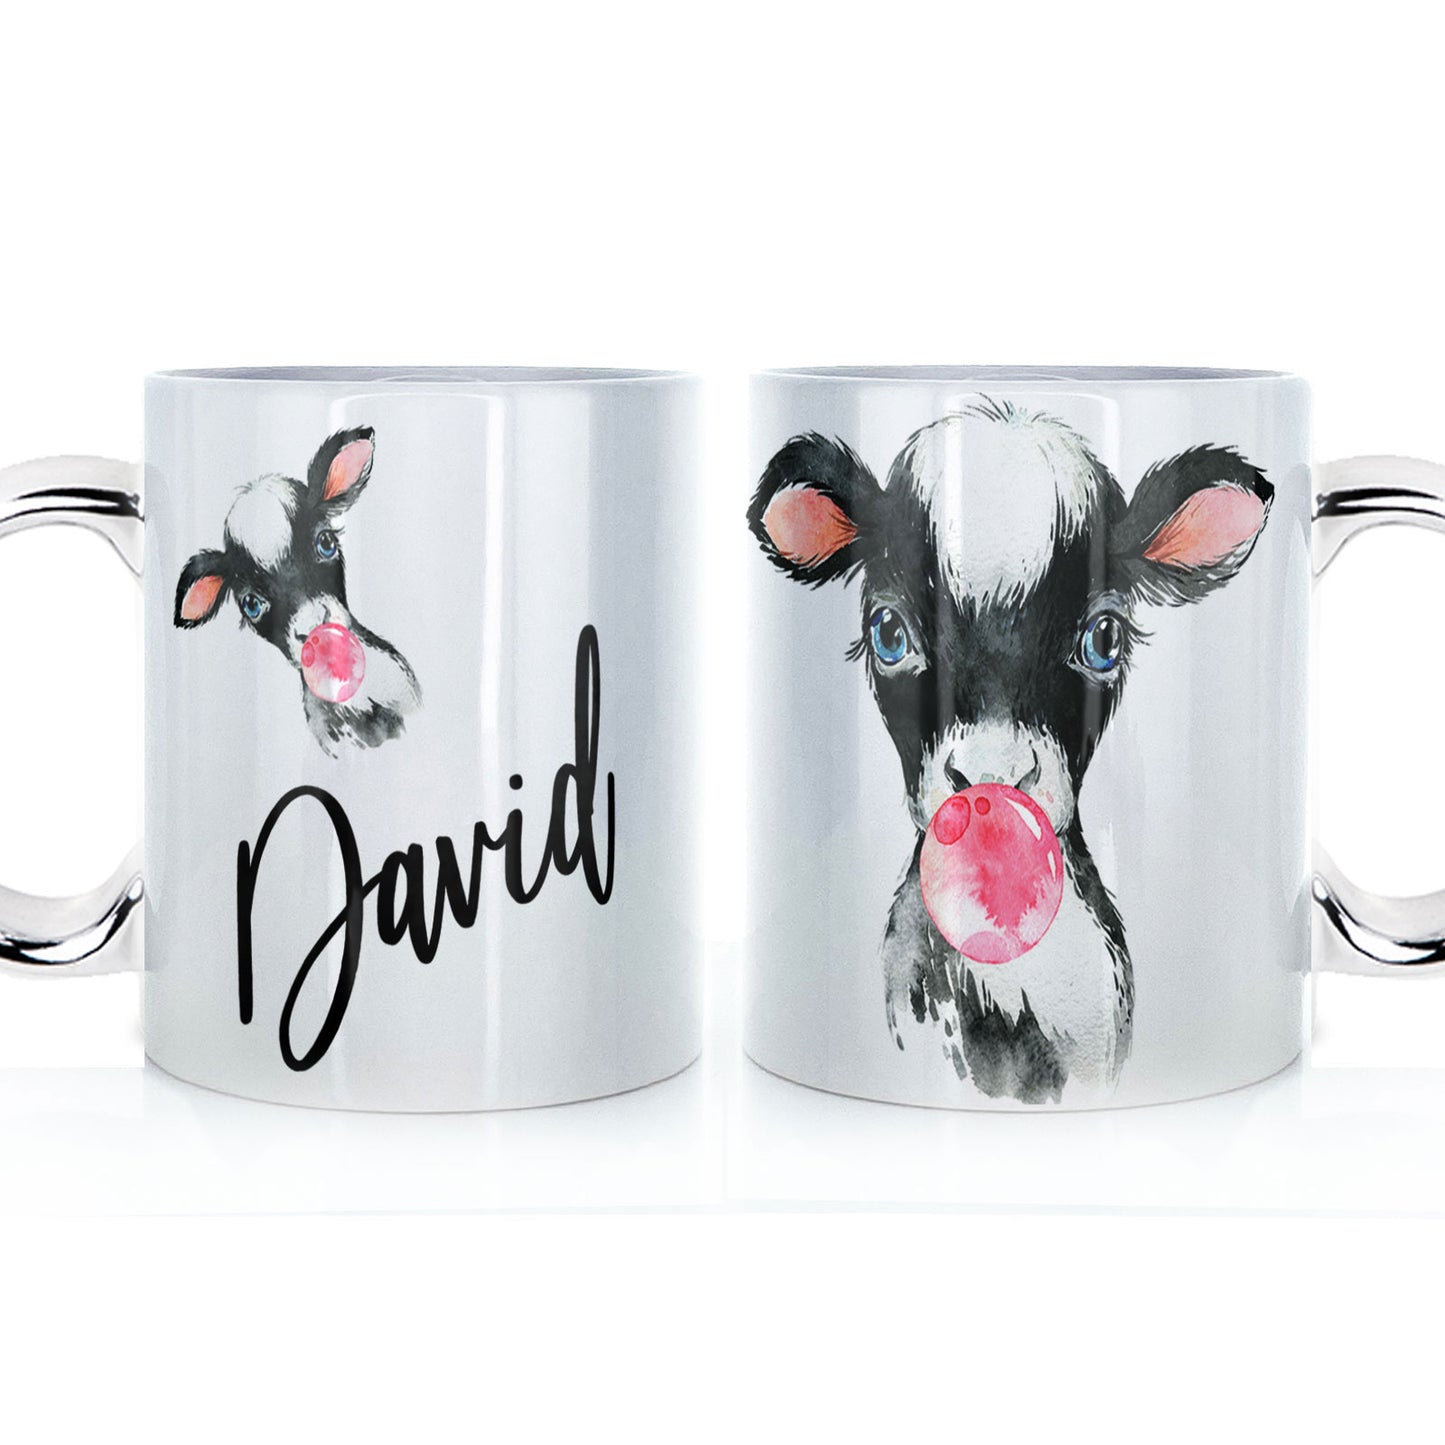 Personalised Mug with Stylish Text and Bubble Gum Cow